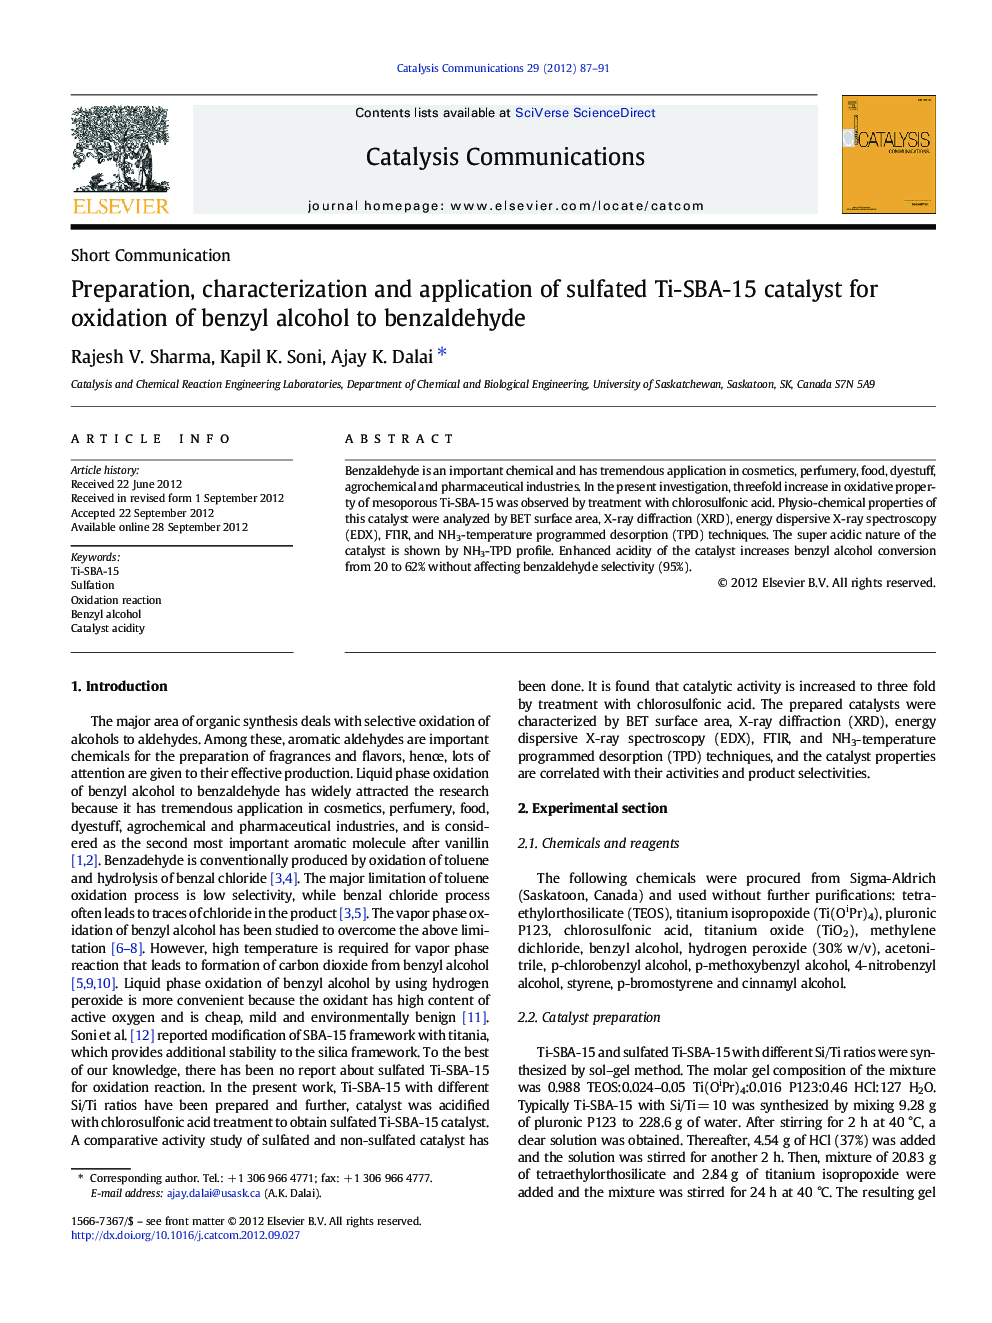 Preparation, characterization and application of sulfated Ti-SBA-15 catalyst for oxidation of benzyl alcohol to benzaldehyde